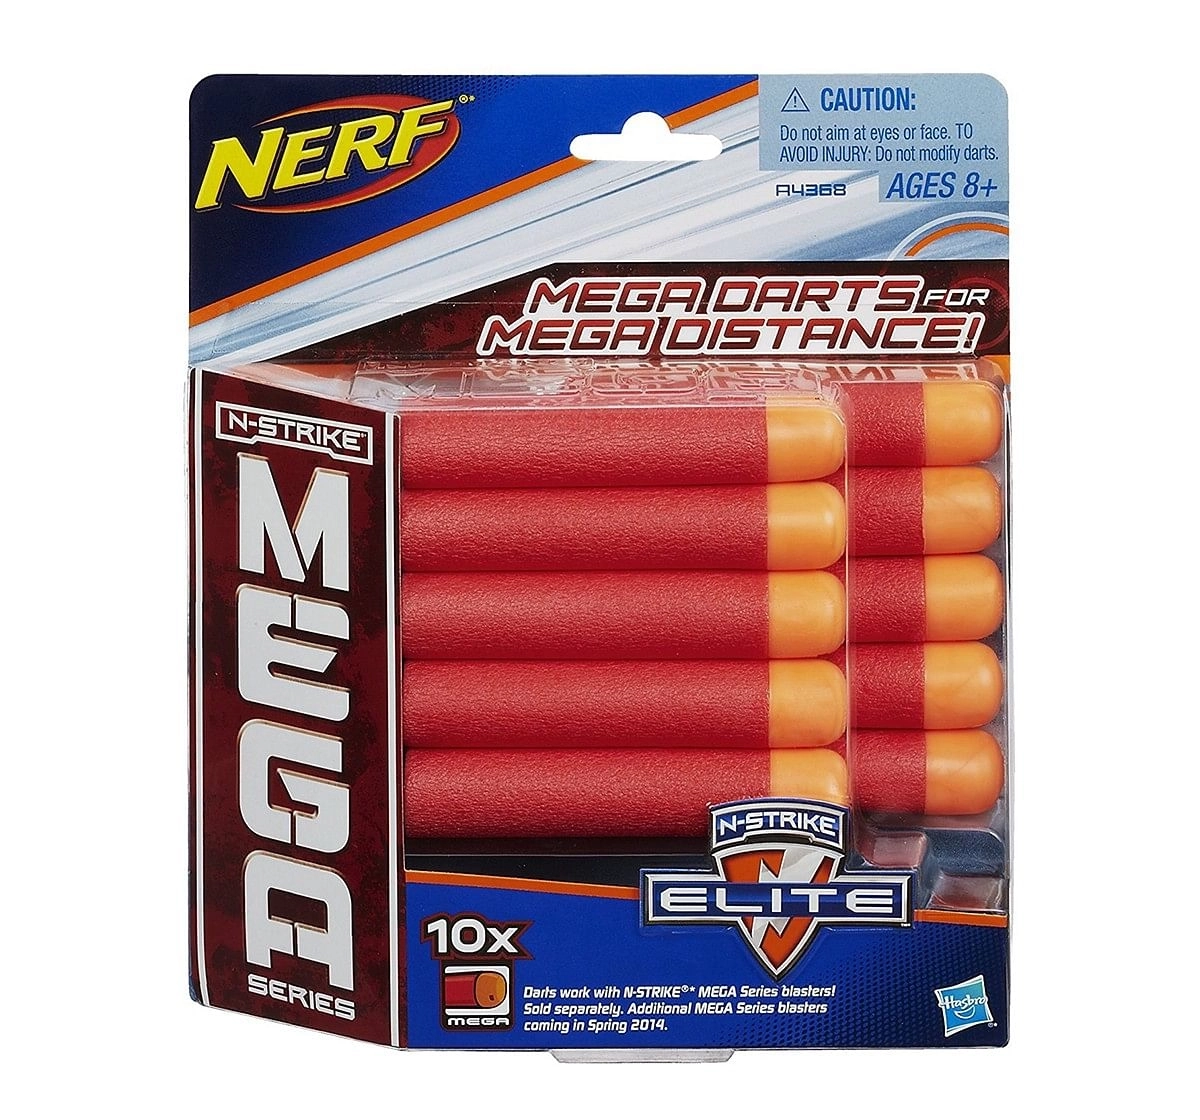 Nerf Darts 10-Pack Refill For Nerf Mega Blasters -  8Y+ (Red)